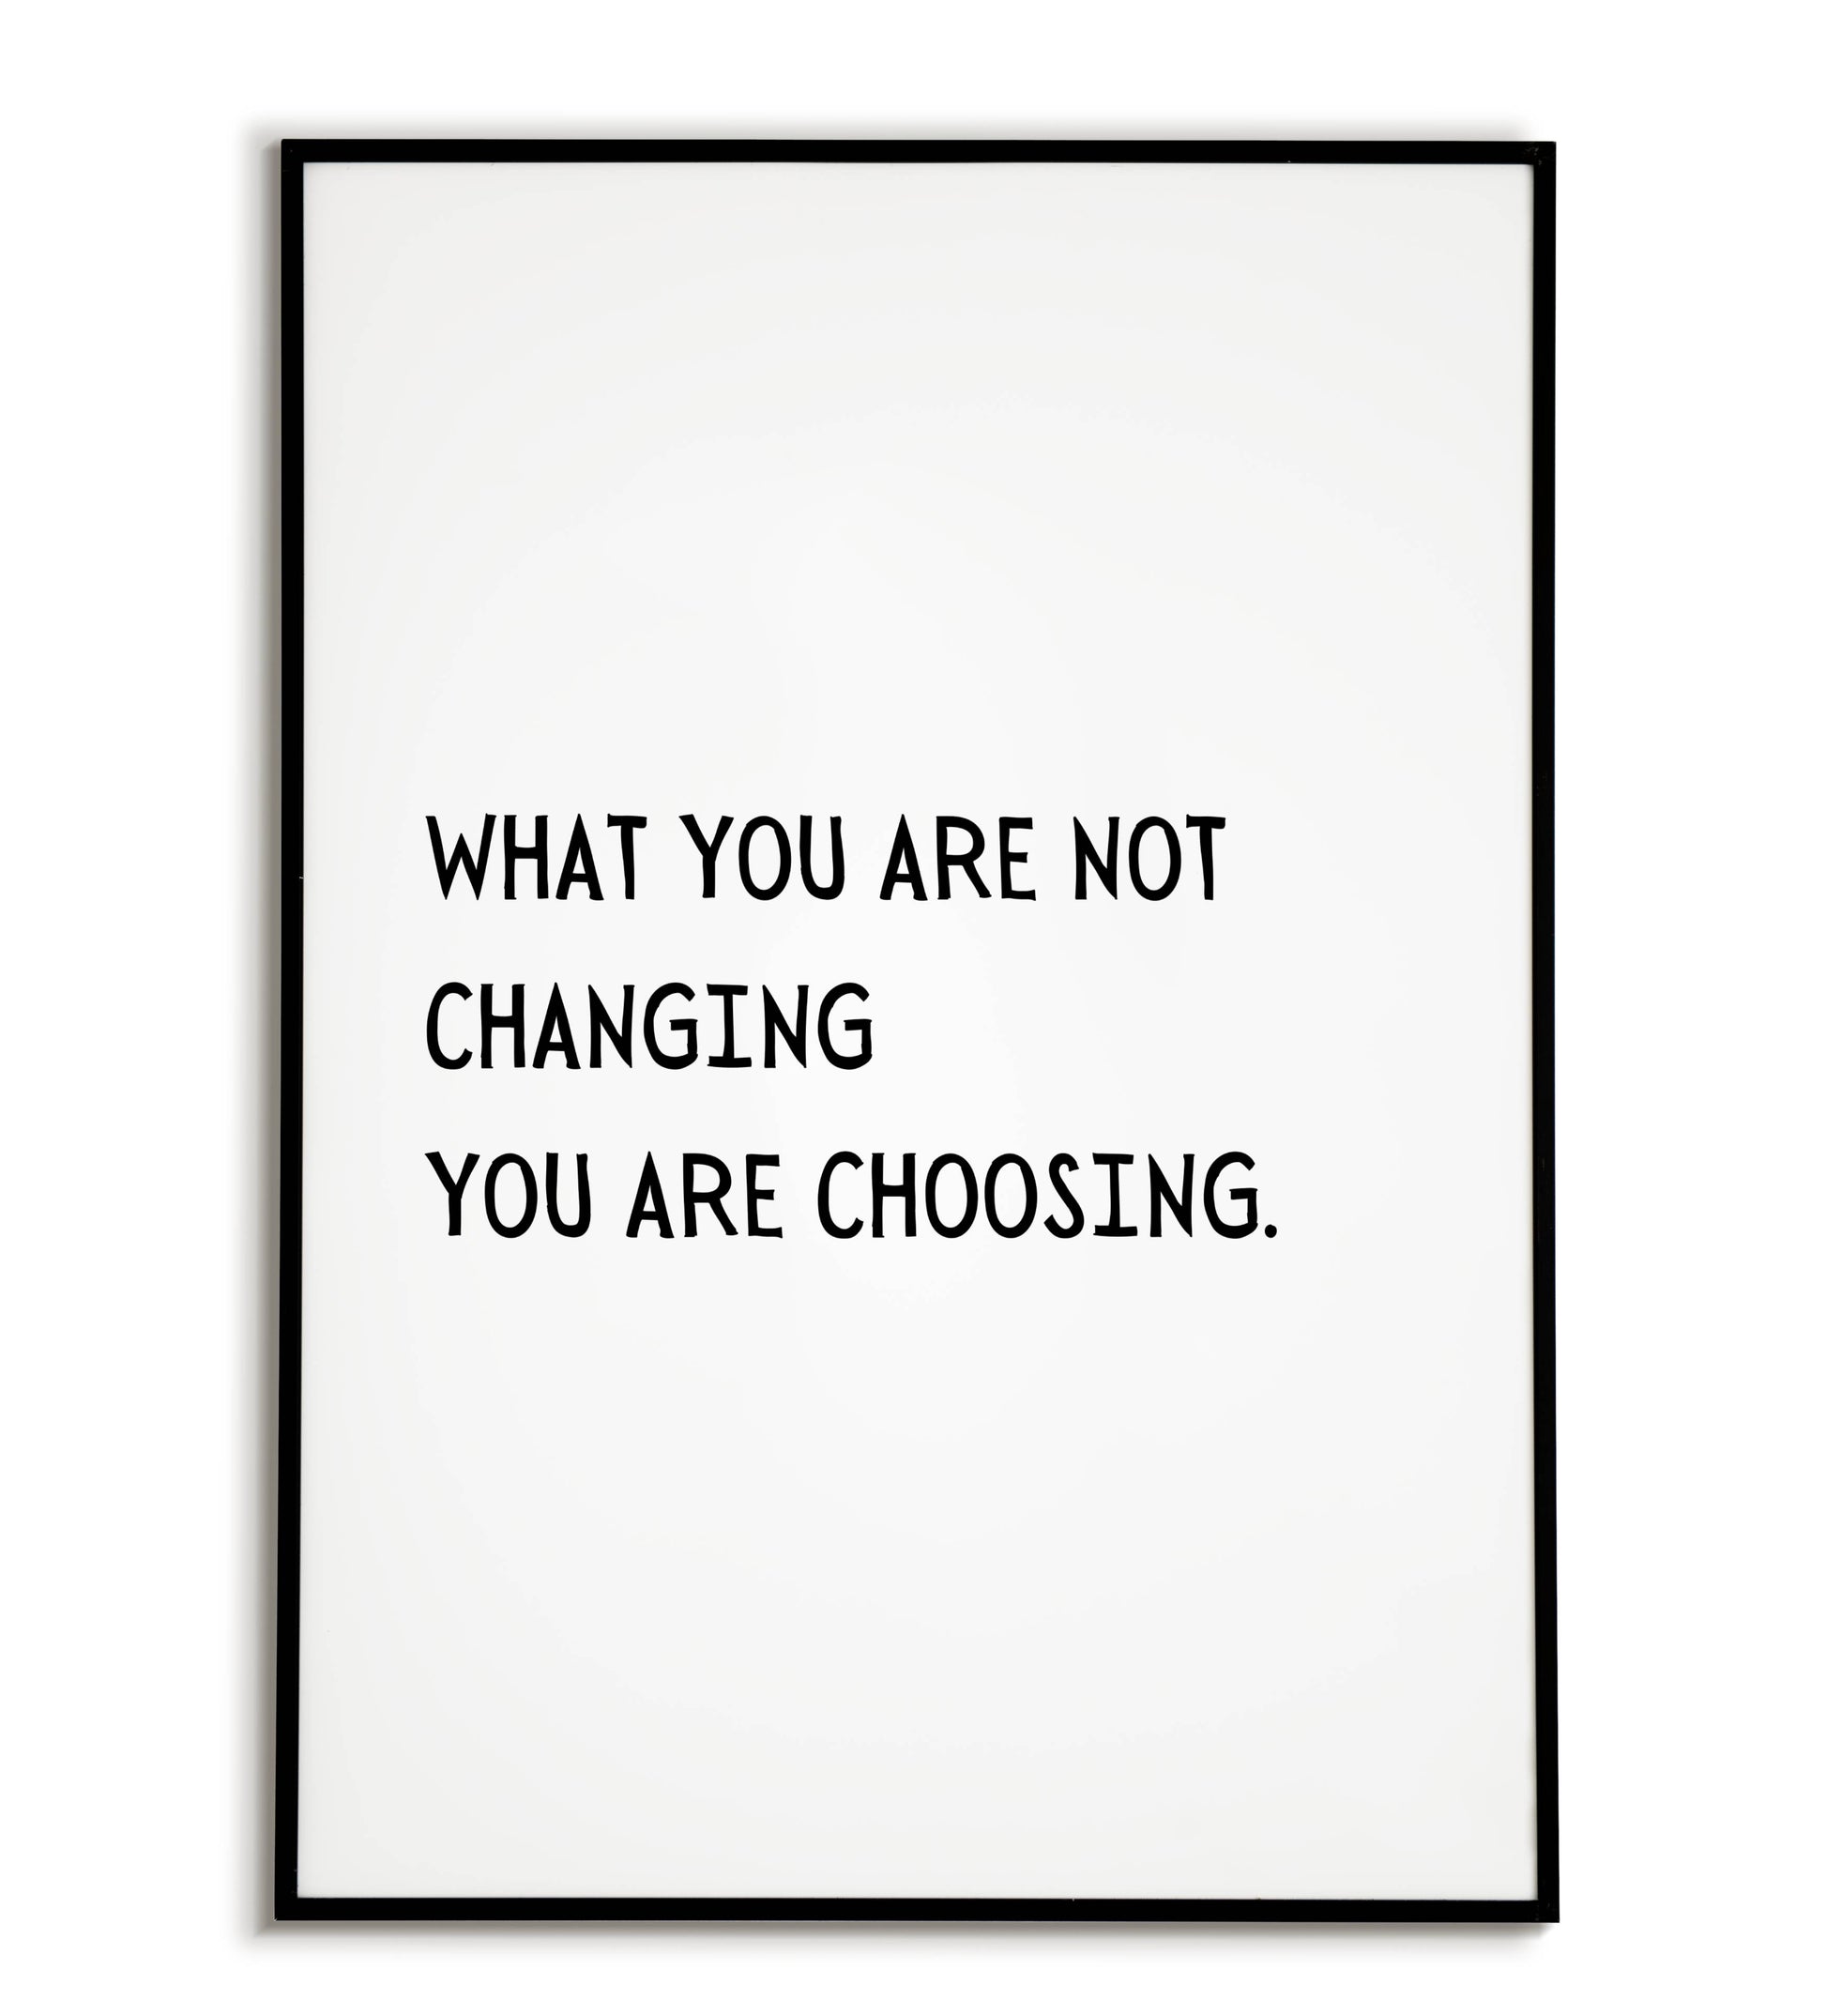 What are you not changing you are choosing" typographic self-reflection poster.